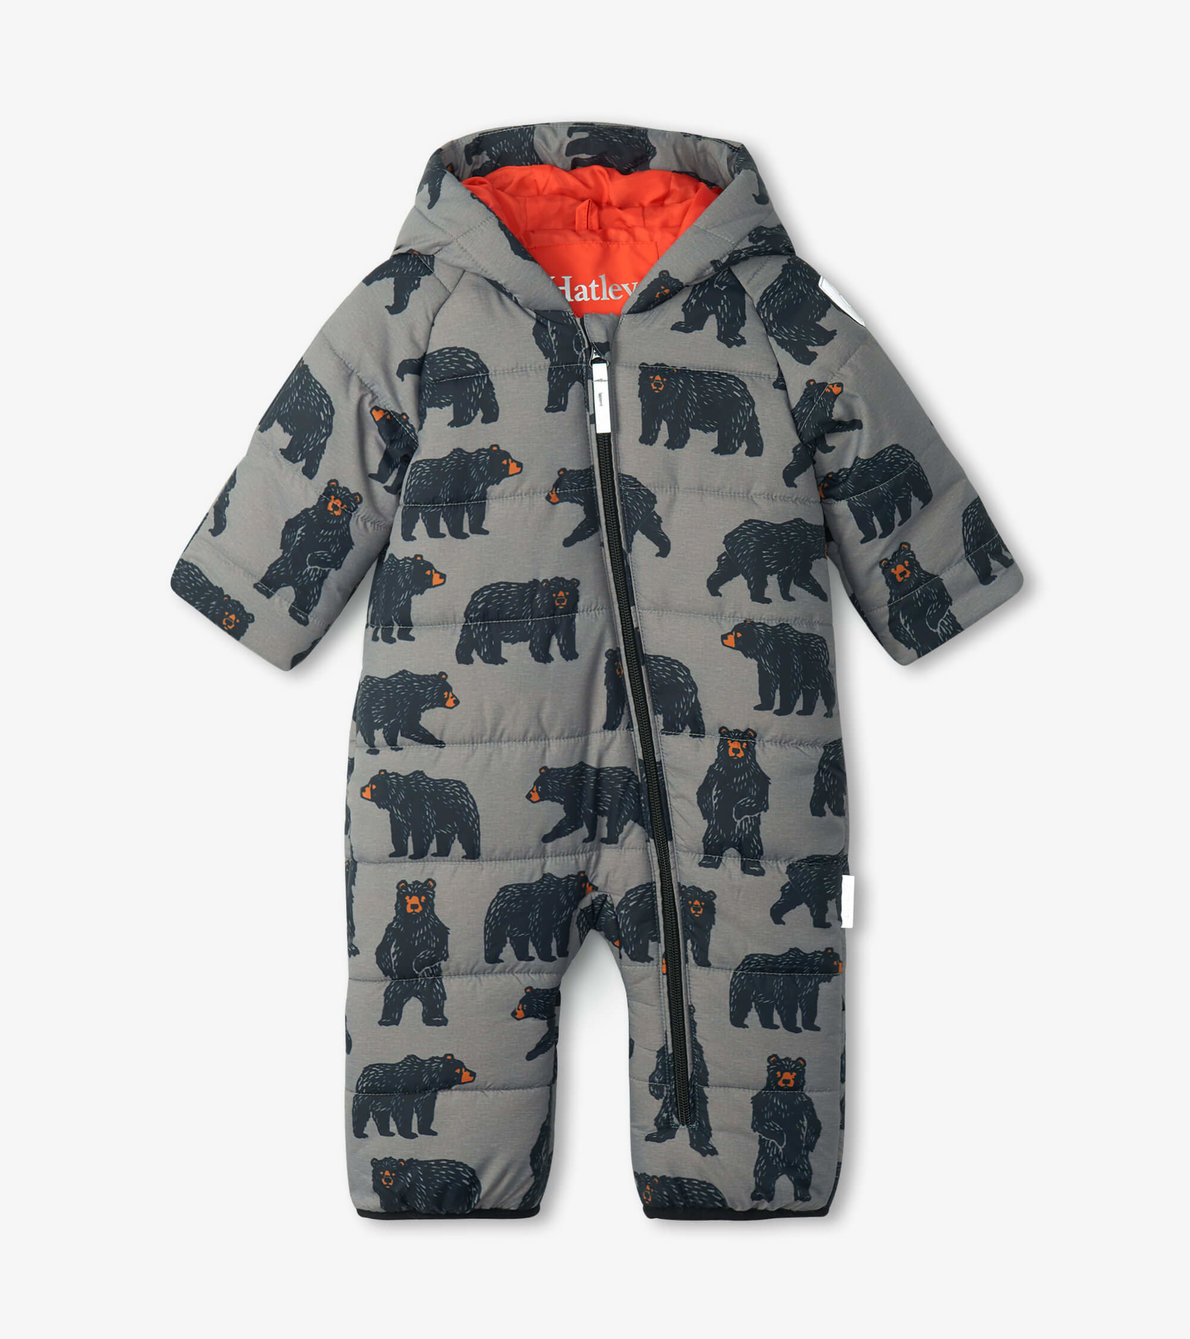 View larger image of Wild Bears Baby Snowsuit